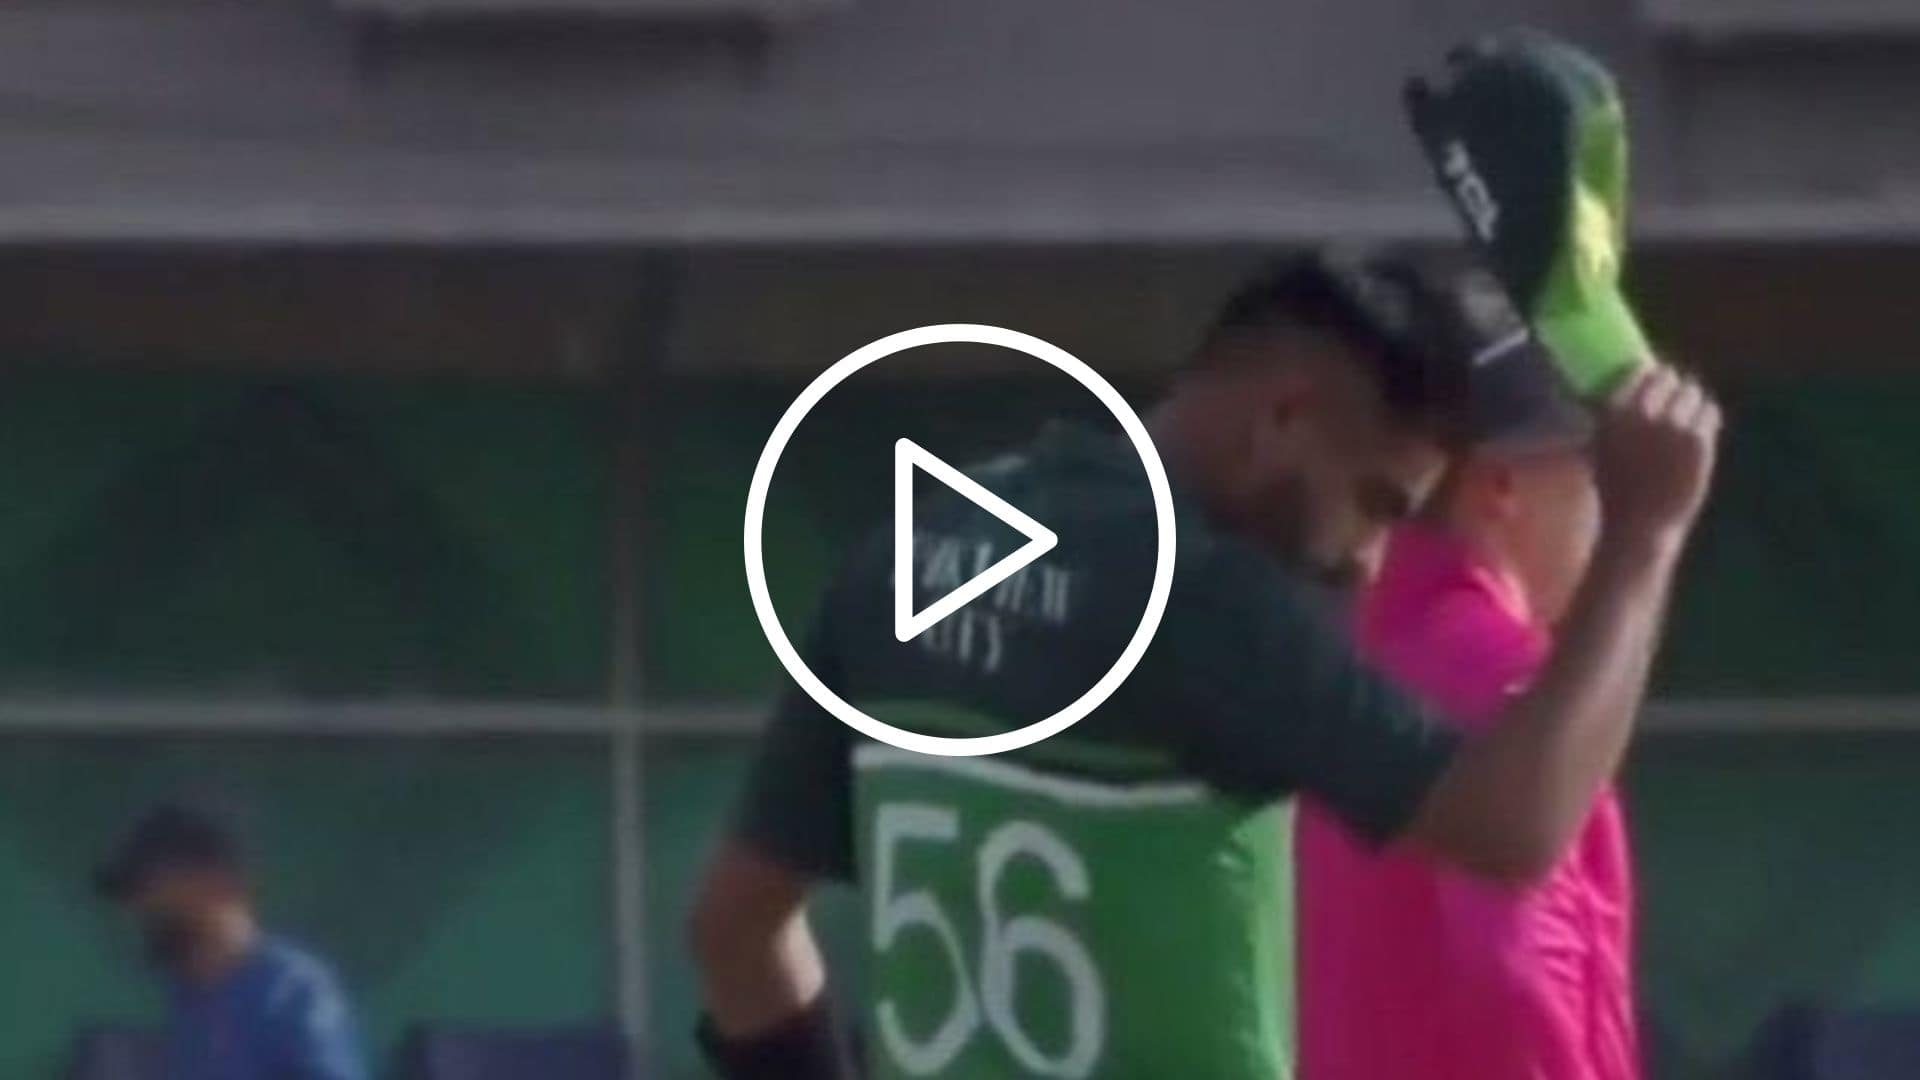 [Watch] Babar Azam Throws His Cap In Anger After Rizwan's Run Out